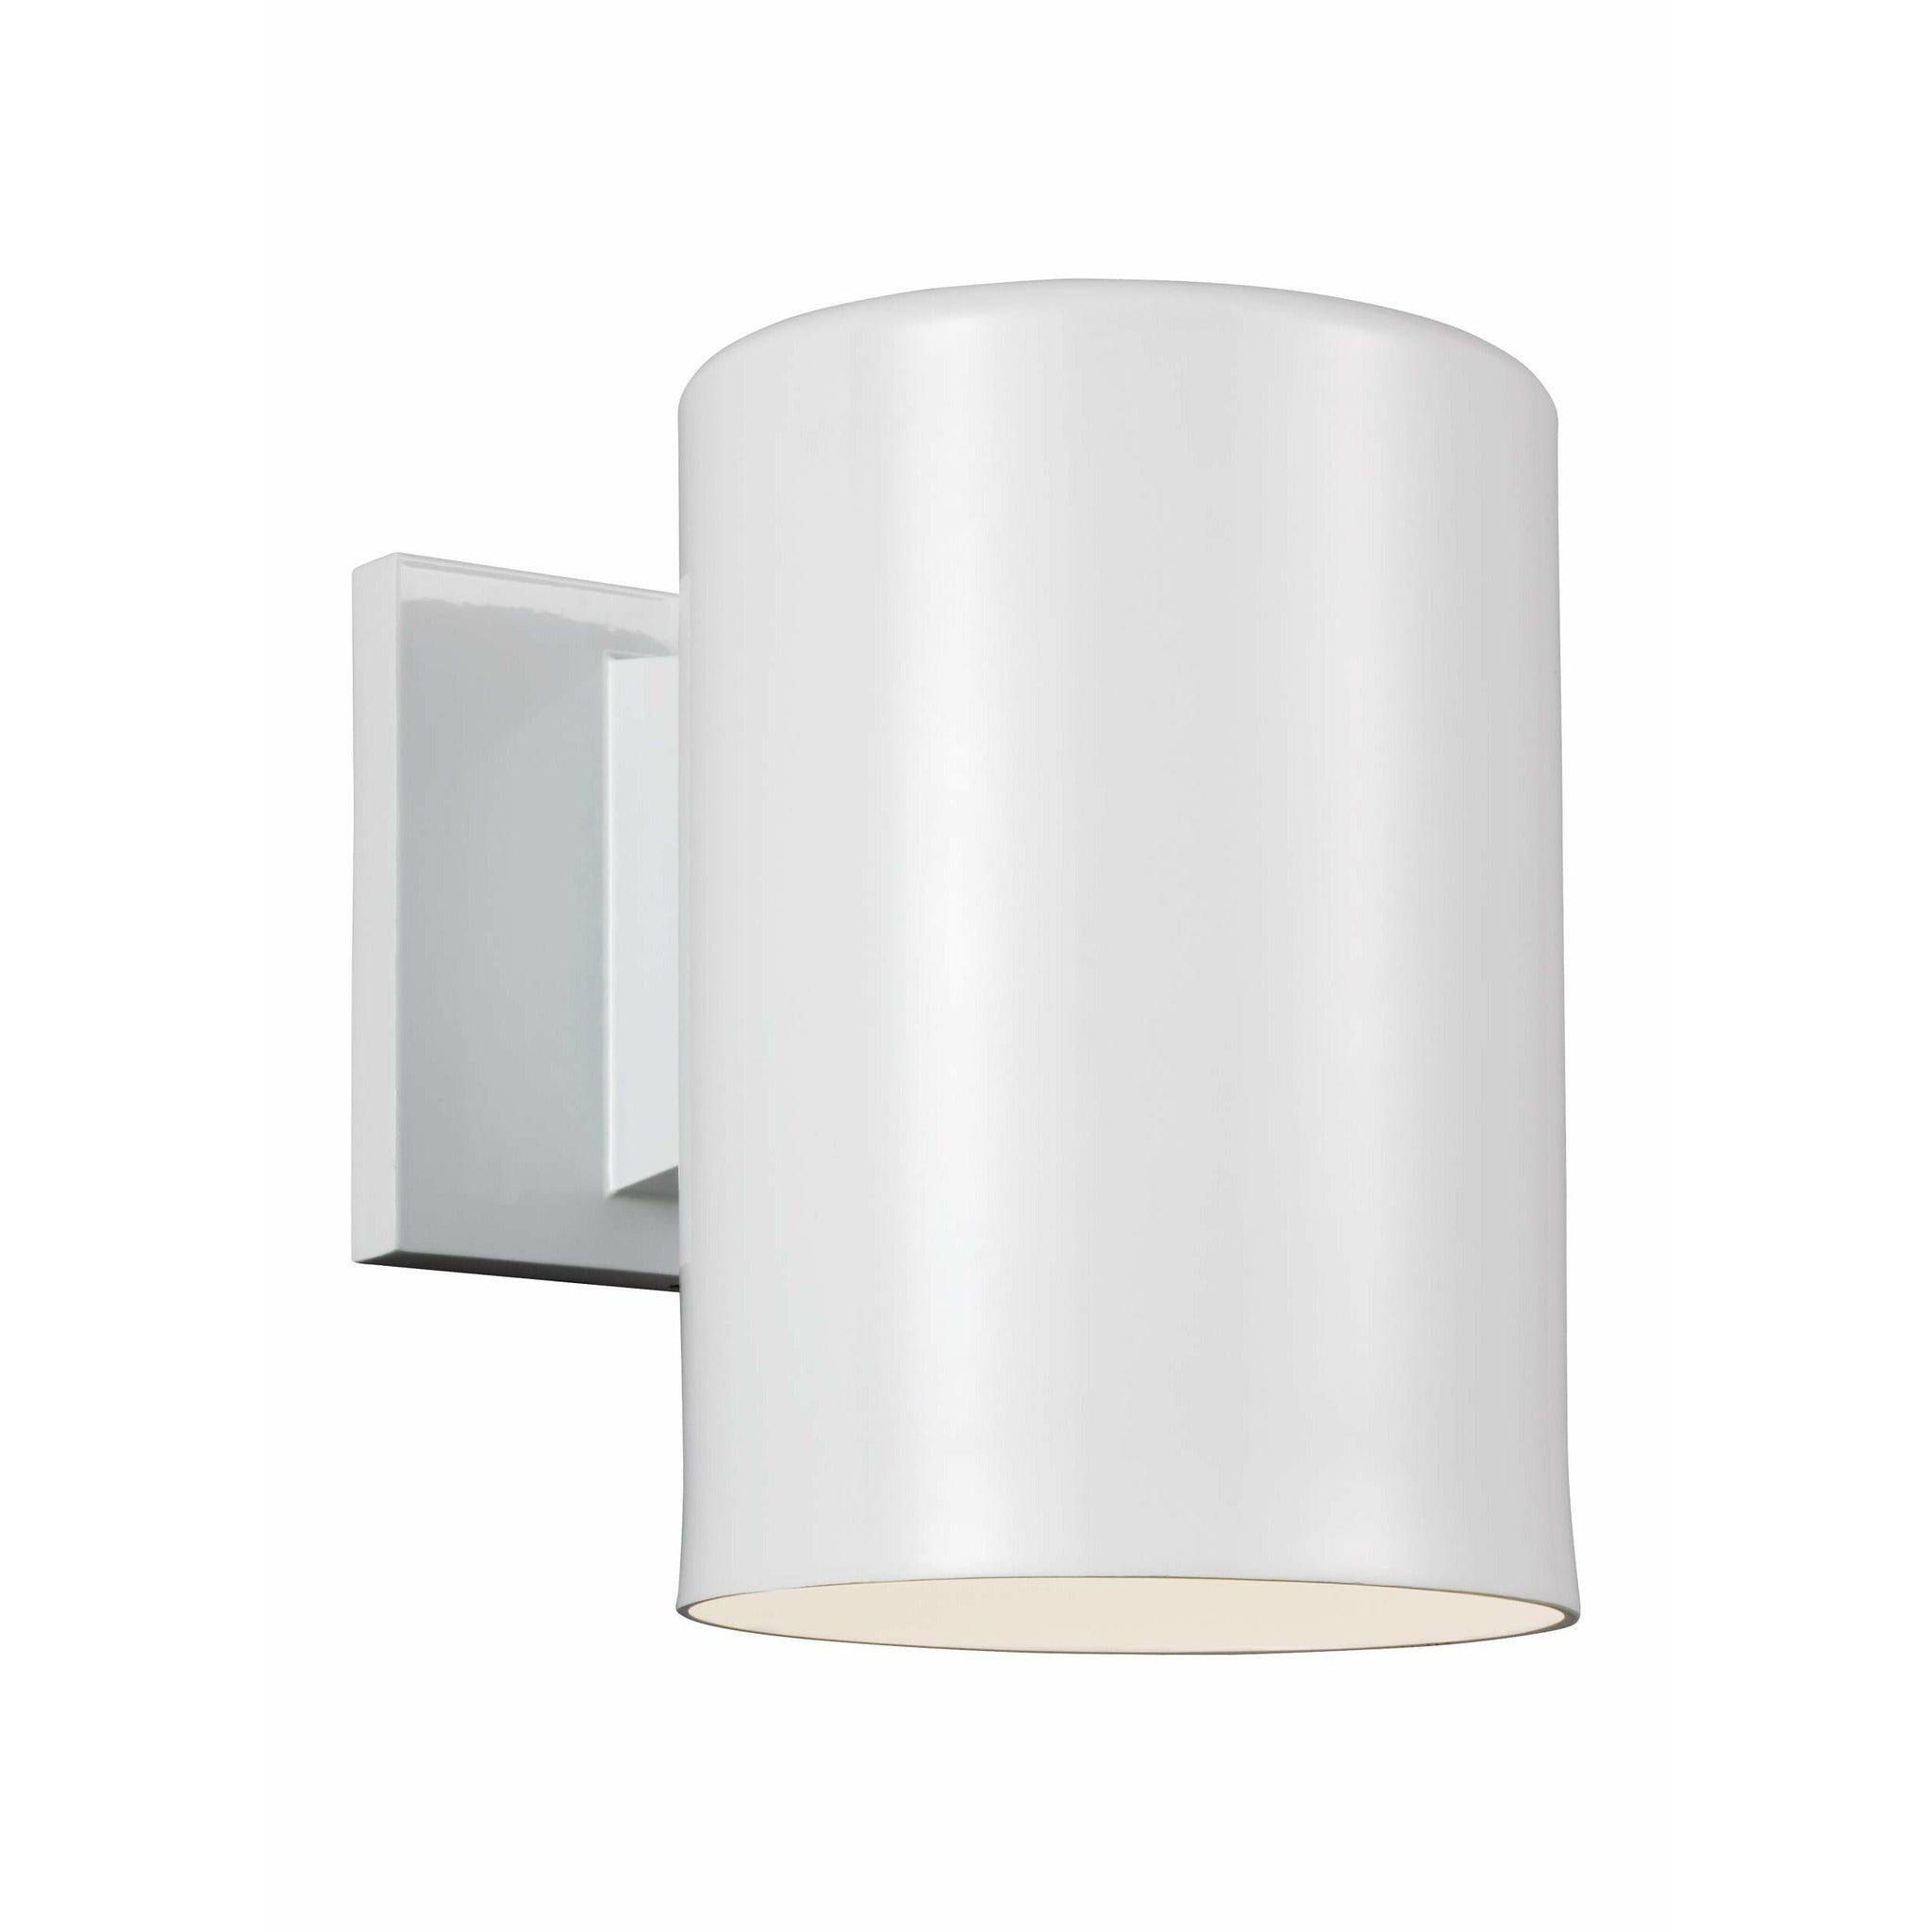 Outdoor Cylinders Small 1-Light Outdoor Wall Light (with Bulb)